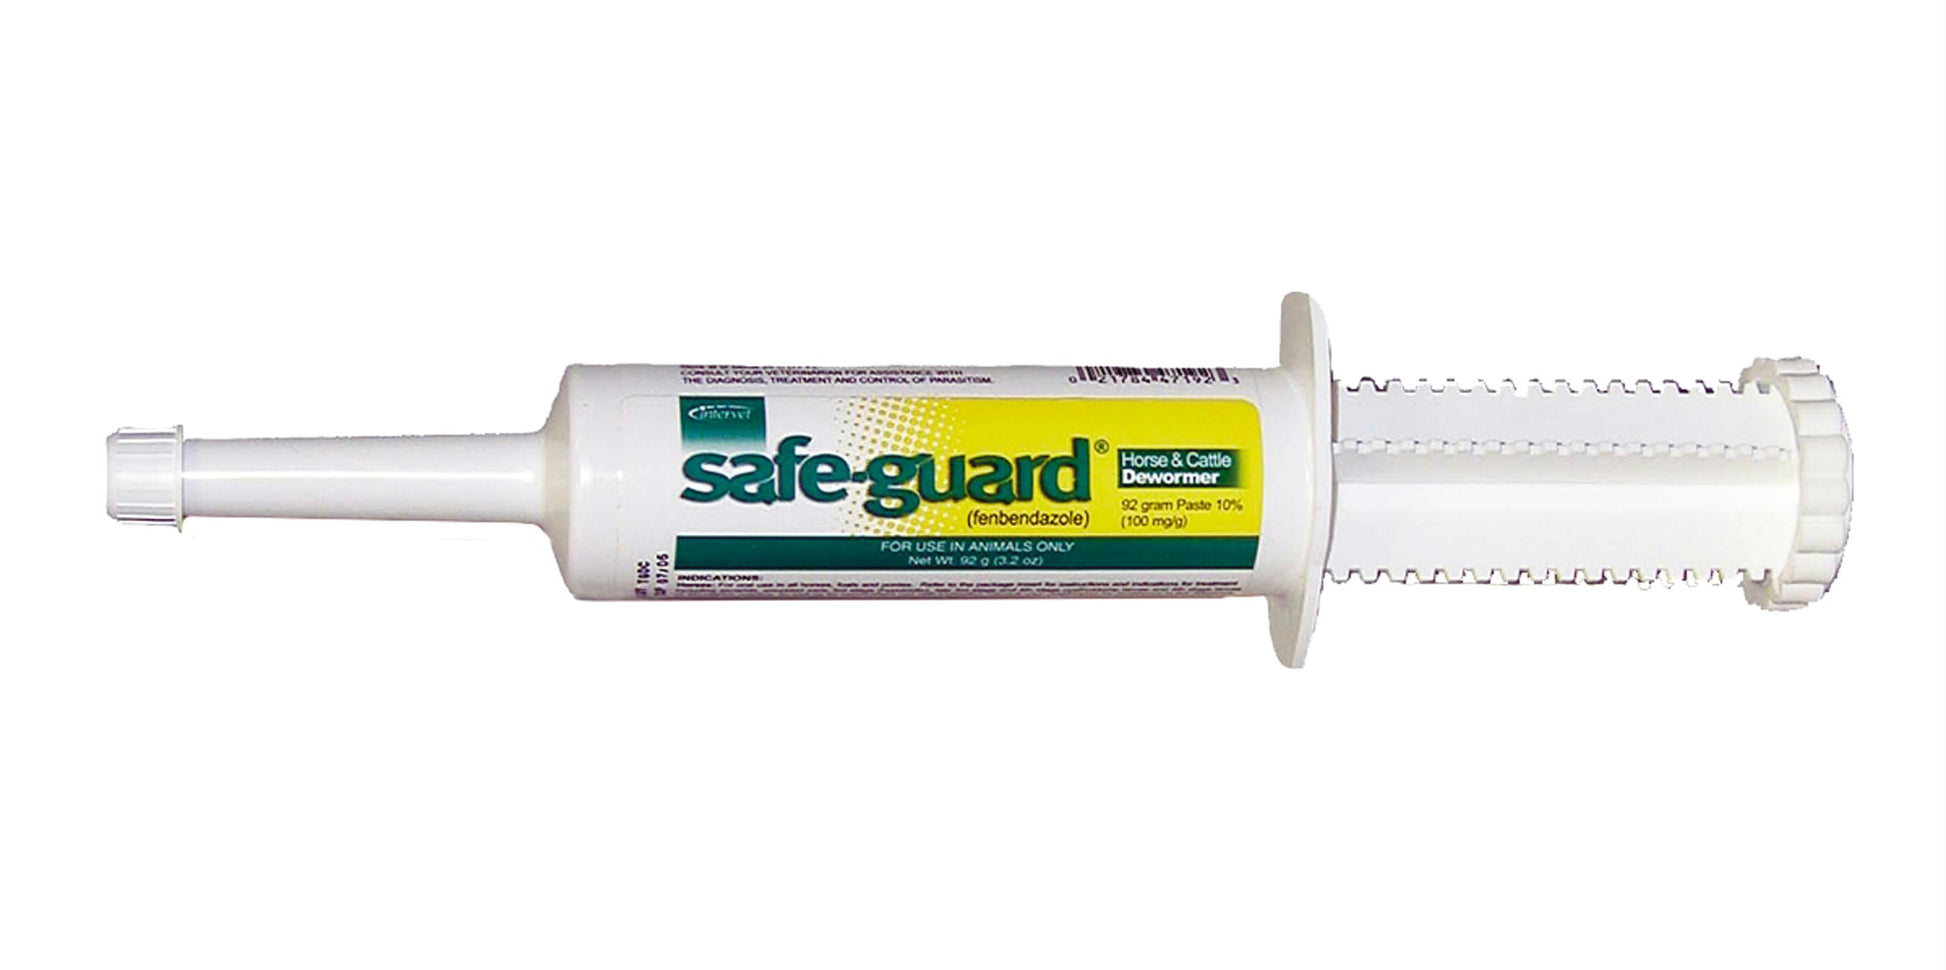 Safe-guard 10% Cattle & Equine Dewormer - aomega-products